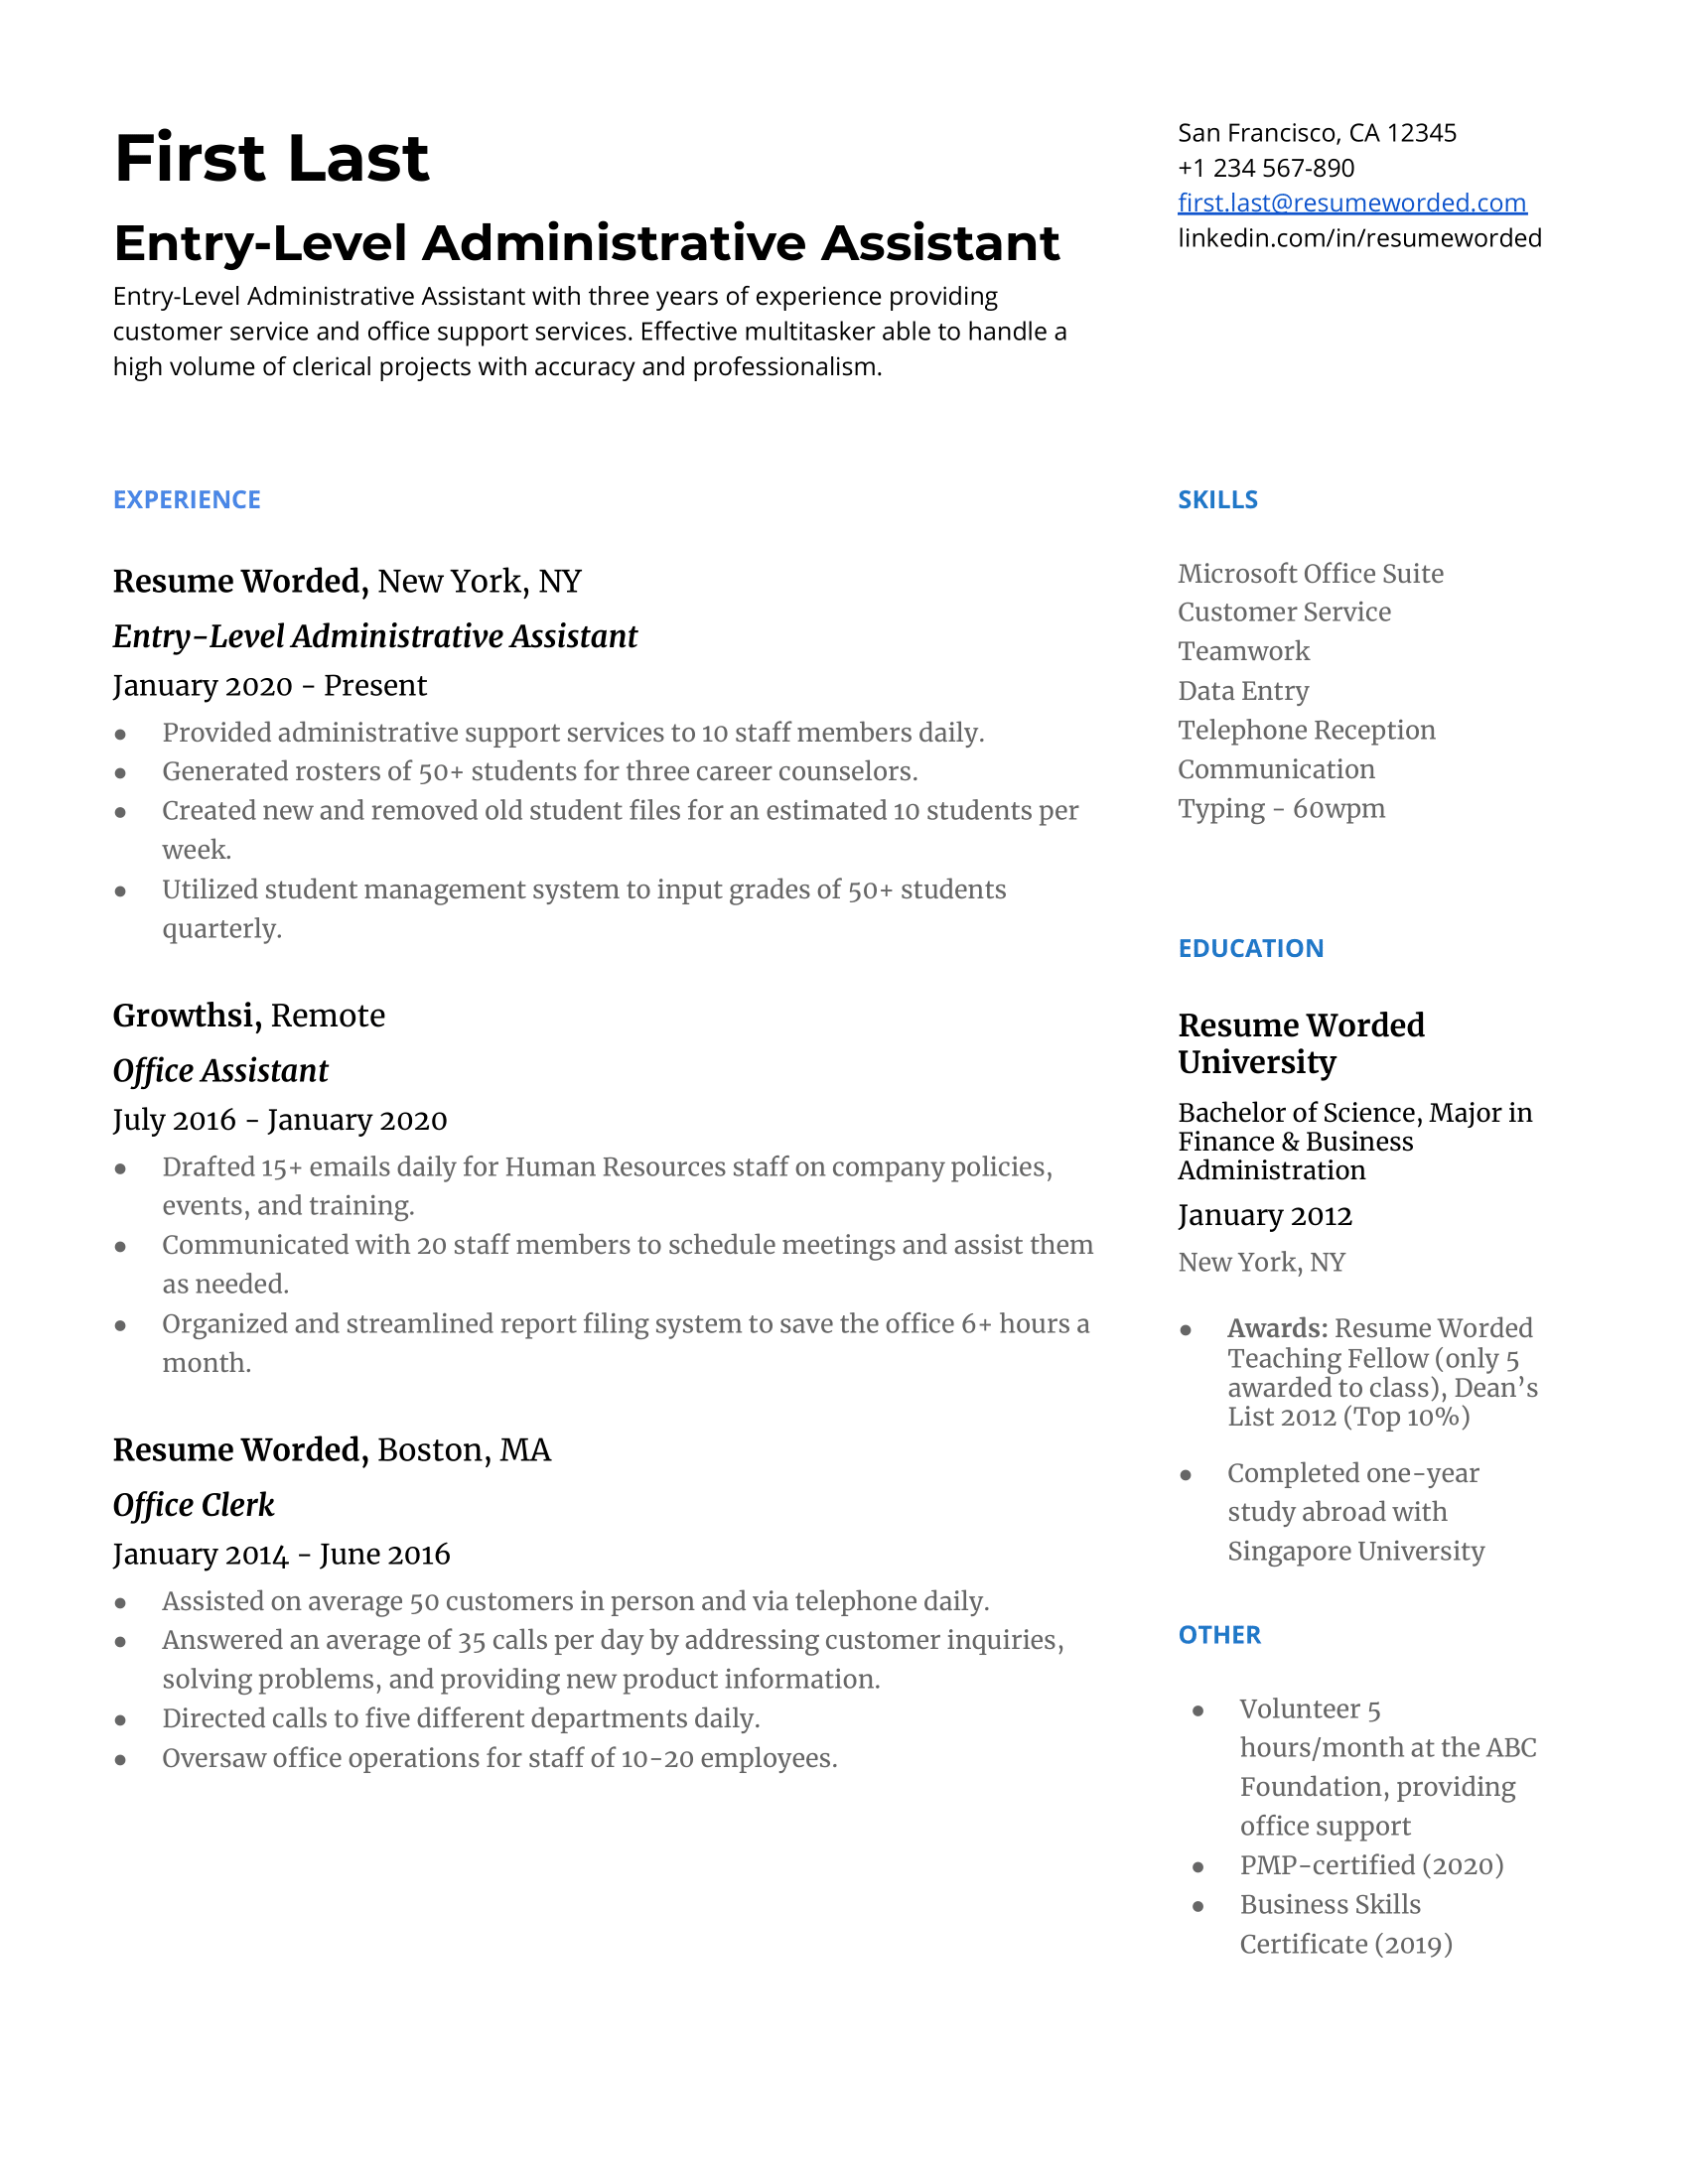 A CV for an Entry Level Administrative Assistant position.